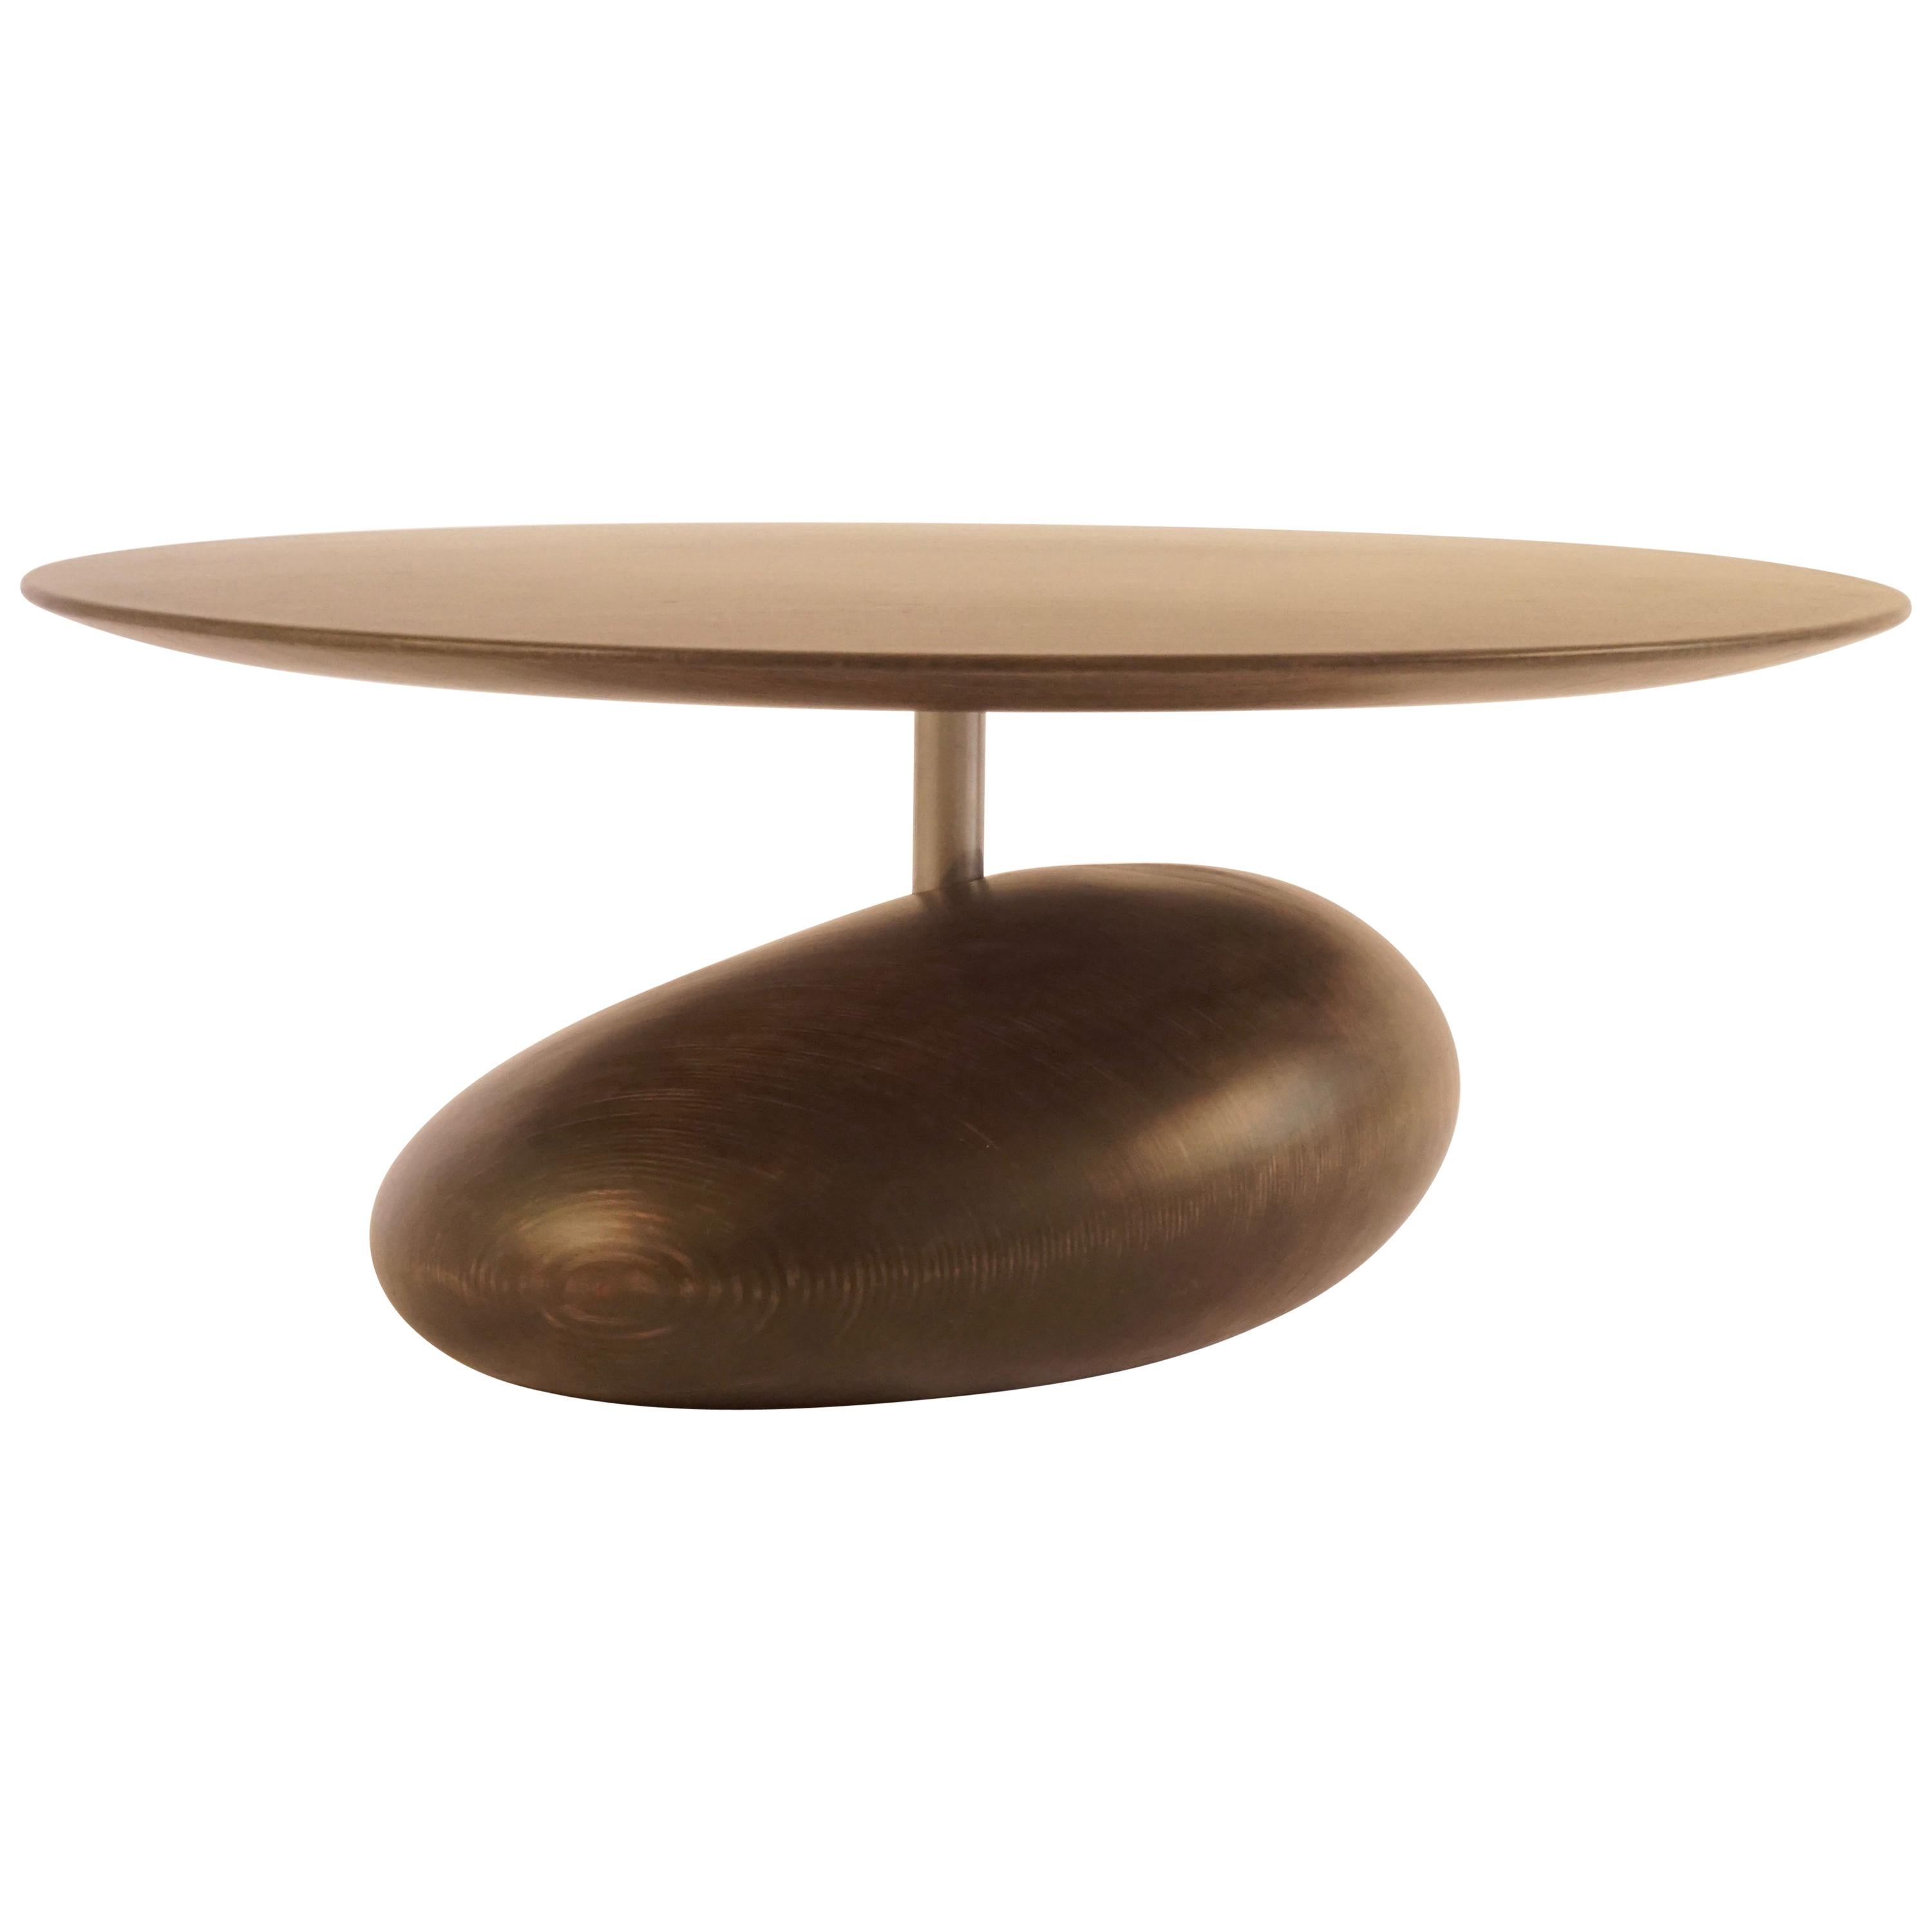 Laminated Finland Plywood Skye Side Table with Stone Shaped Base For Sale